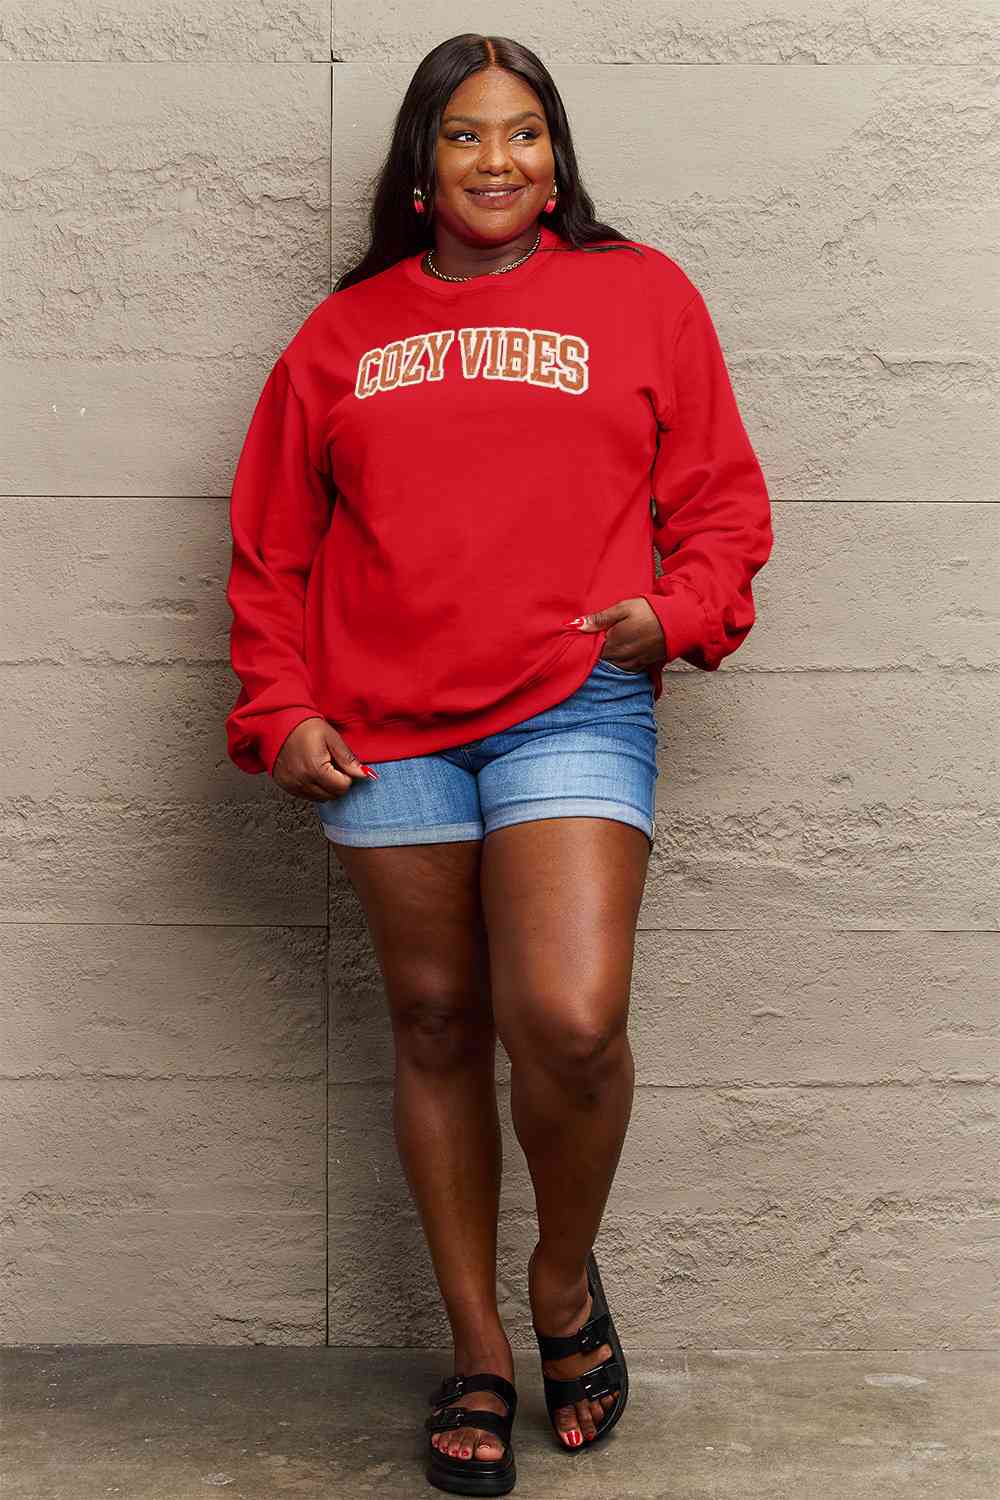 Simply Love Sweat-shirt graphique COSY VIBES pleine taille